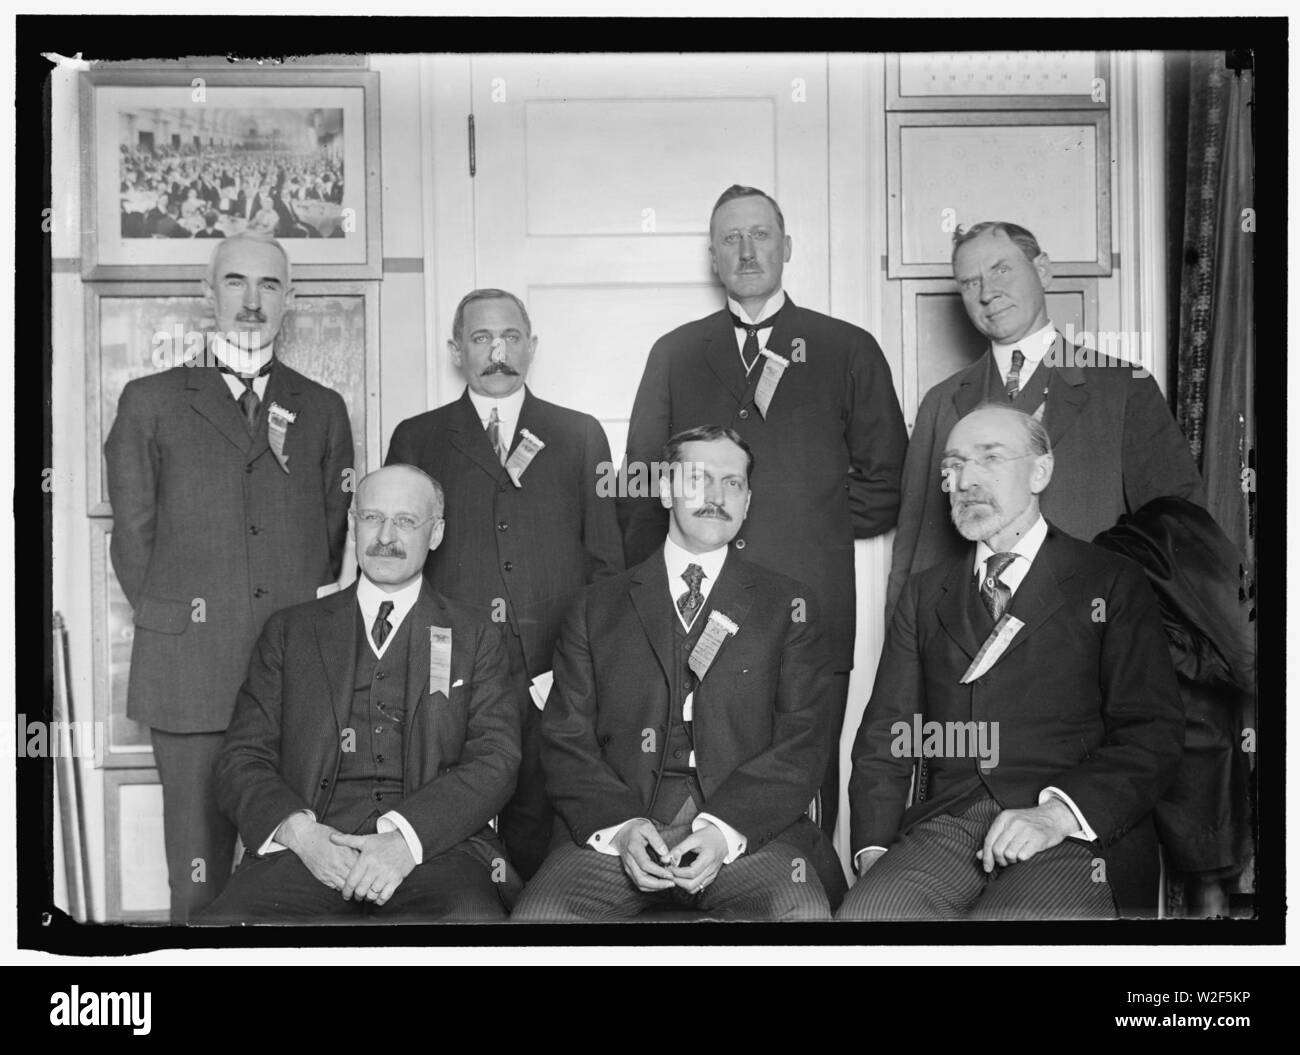 CHAMBER OF COMERCE OF U.S.A. DIRECTORS. REAR- JOHN H. FAYEY; W.M. McCORMICK; R. G. RHETT; T.L.L. TEMPLE. FRONT- AUGUST H. VOGEL; HARRY A. WHEELER, PRESIDENT;AT RIGHT REAR IS CHARLES R. VAN Stock Photo